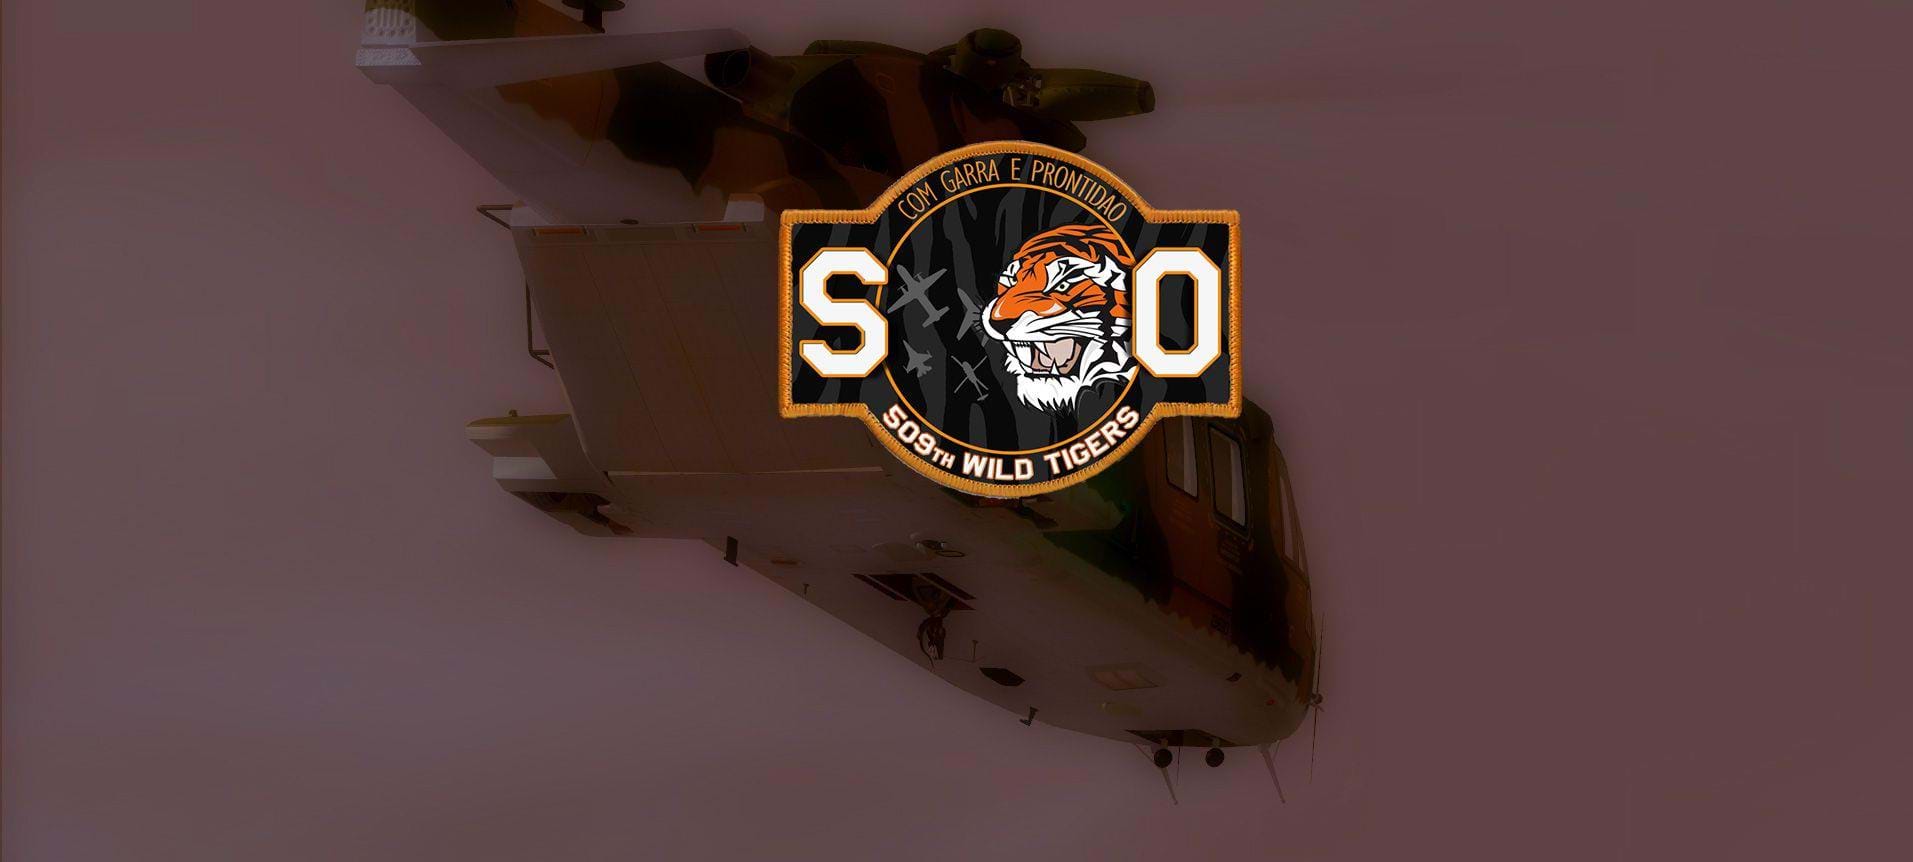 Interview: 509th Wild Tigers